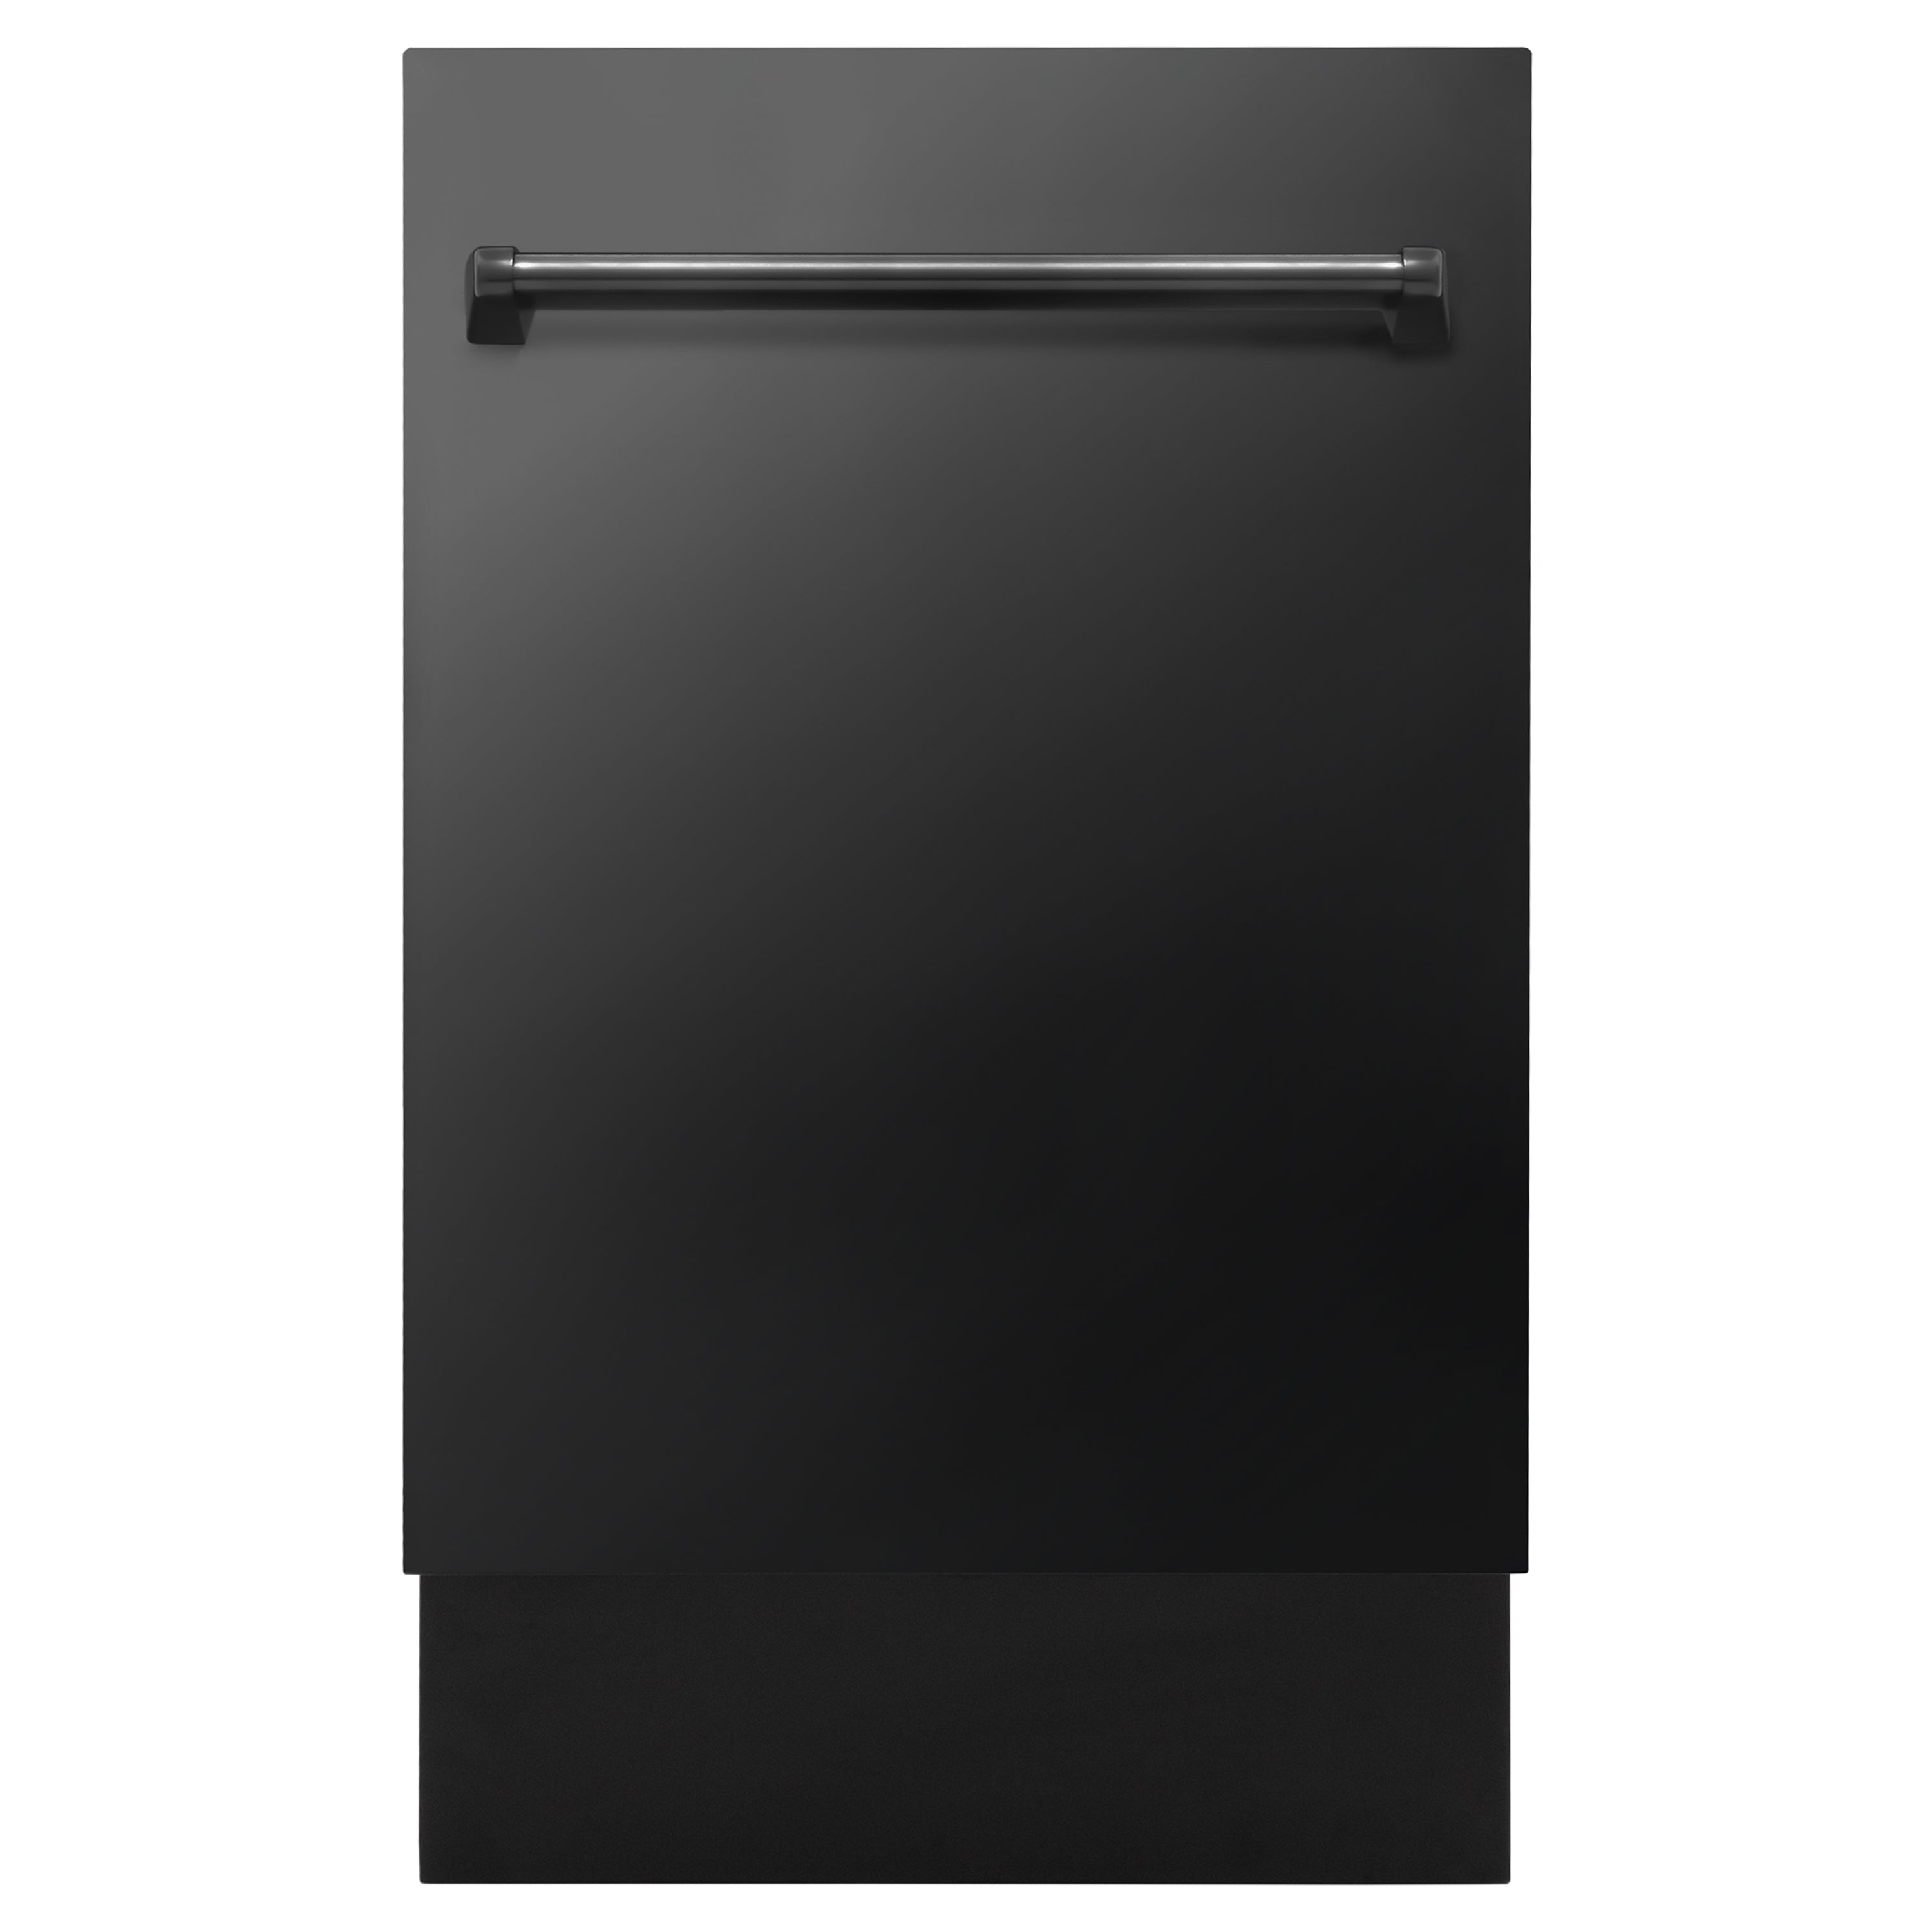 ZLINE 18" Tallac Series 3rd Rack Top Control Built-In Dishwasher in Black Stainless Steel with Stainless Steel Tub, 51dBa (DWV-BS-18)